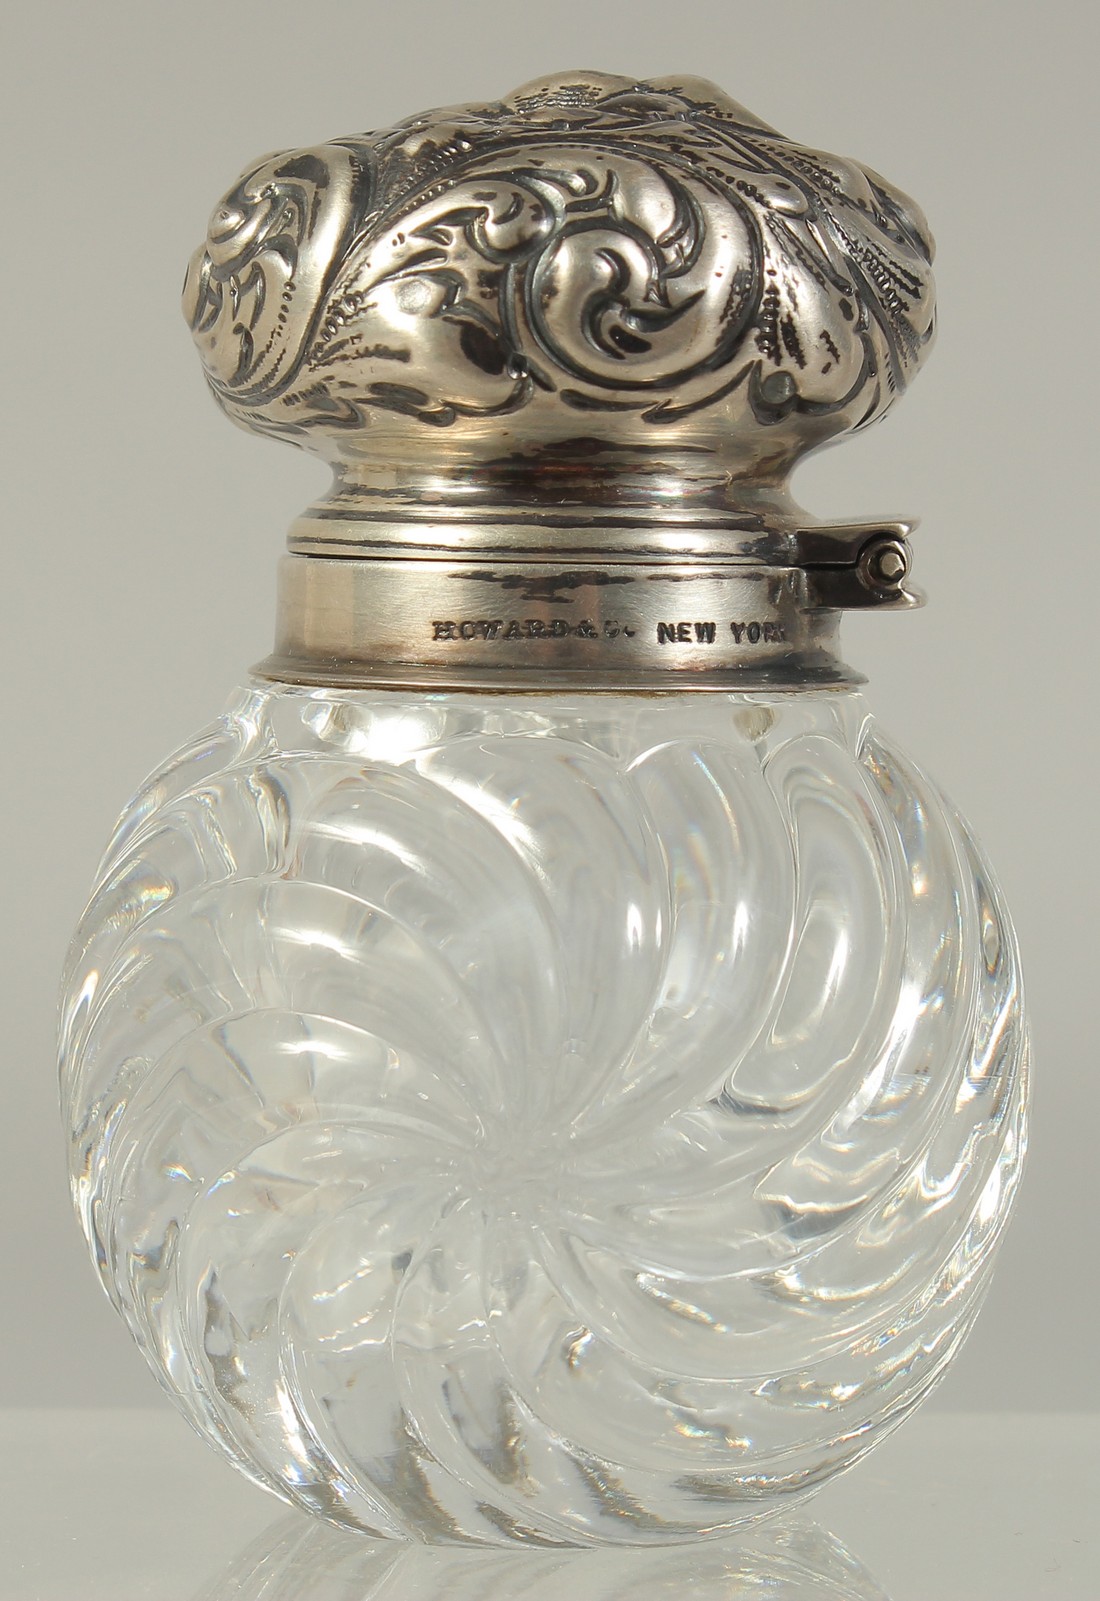 A HOWARD AND CO., NEW YORK, SILVER TOP GLASS INK POT. - Image 3 of 5